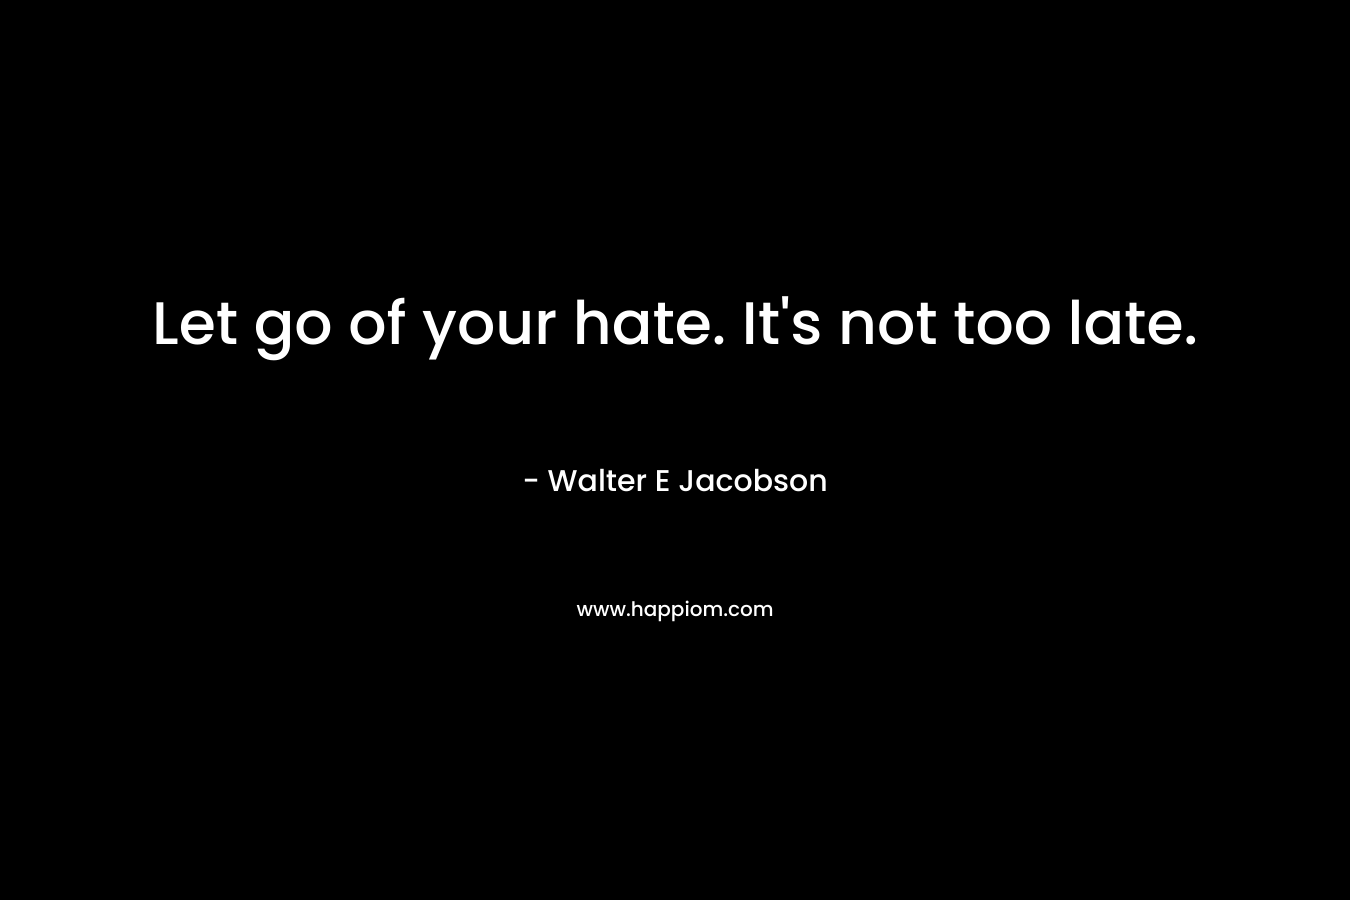 Let go of your hate. It's not too late.